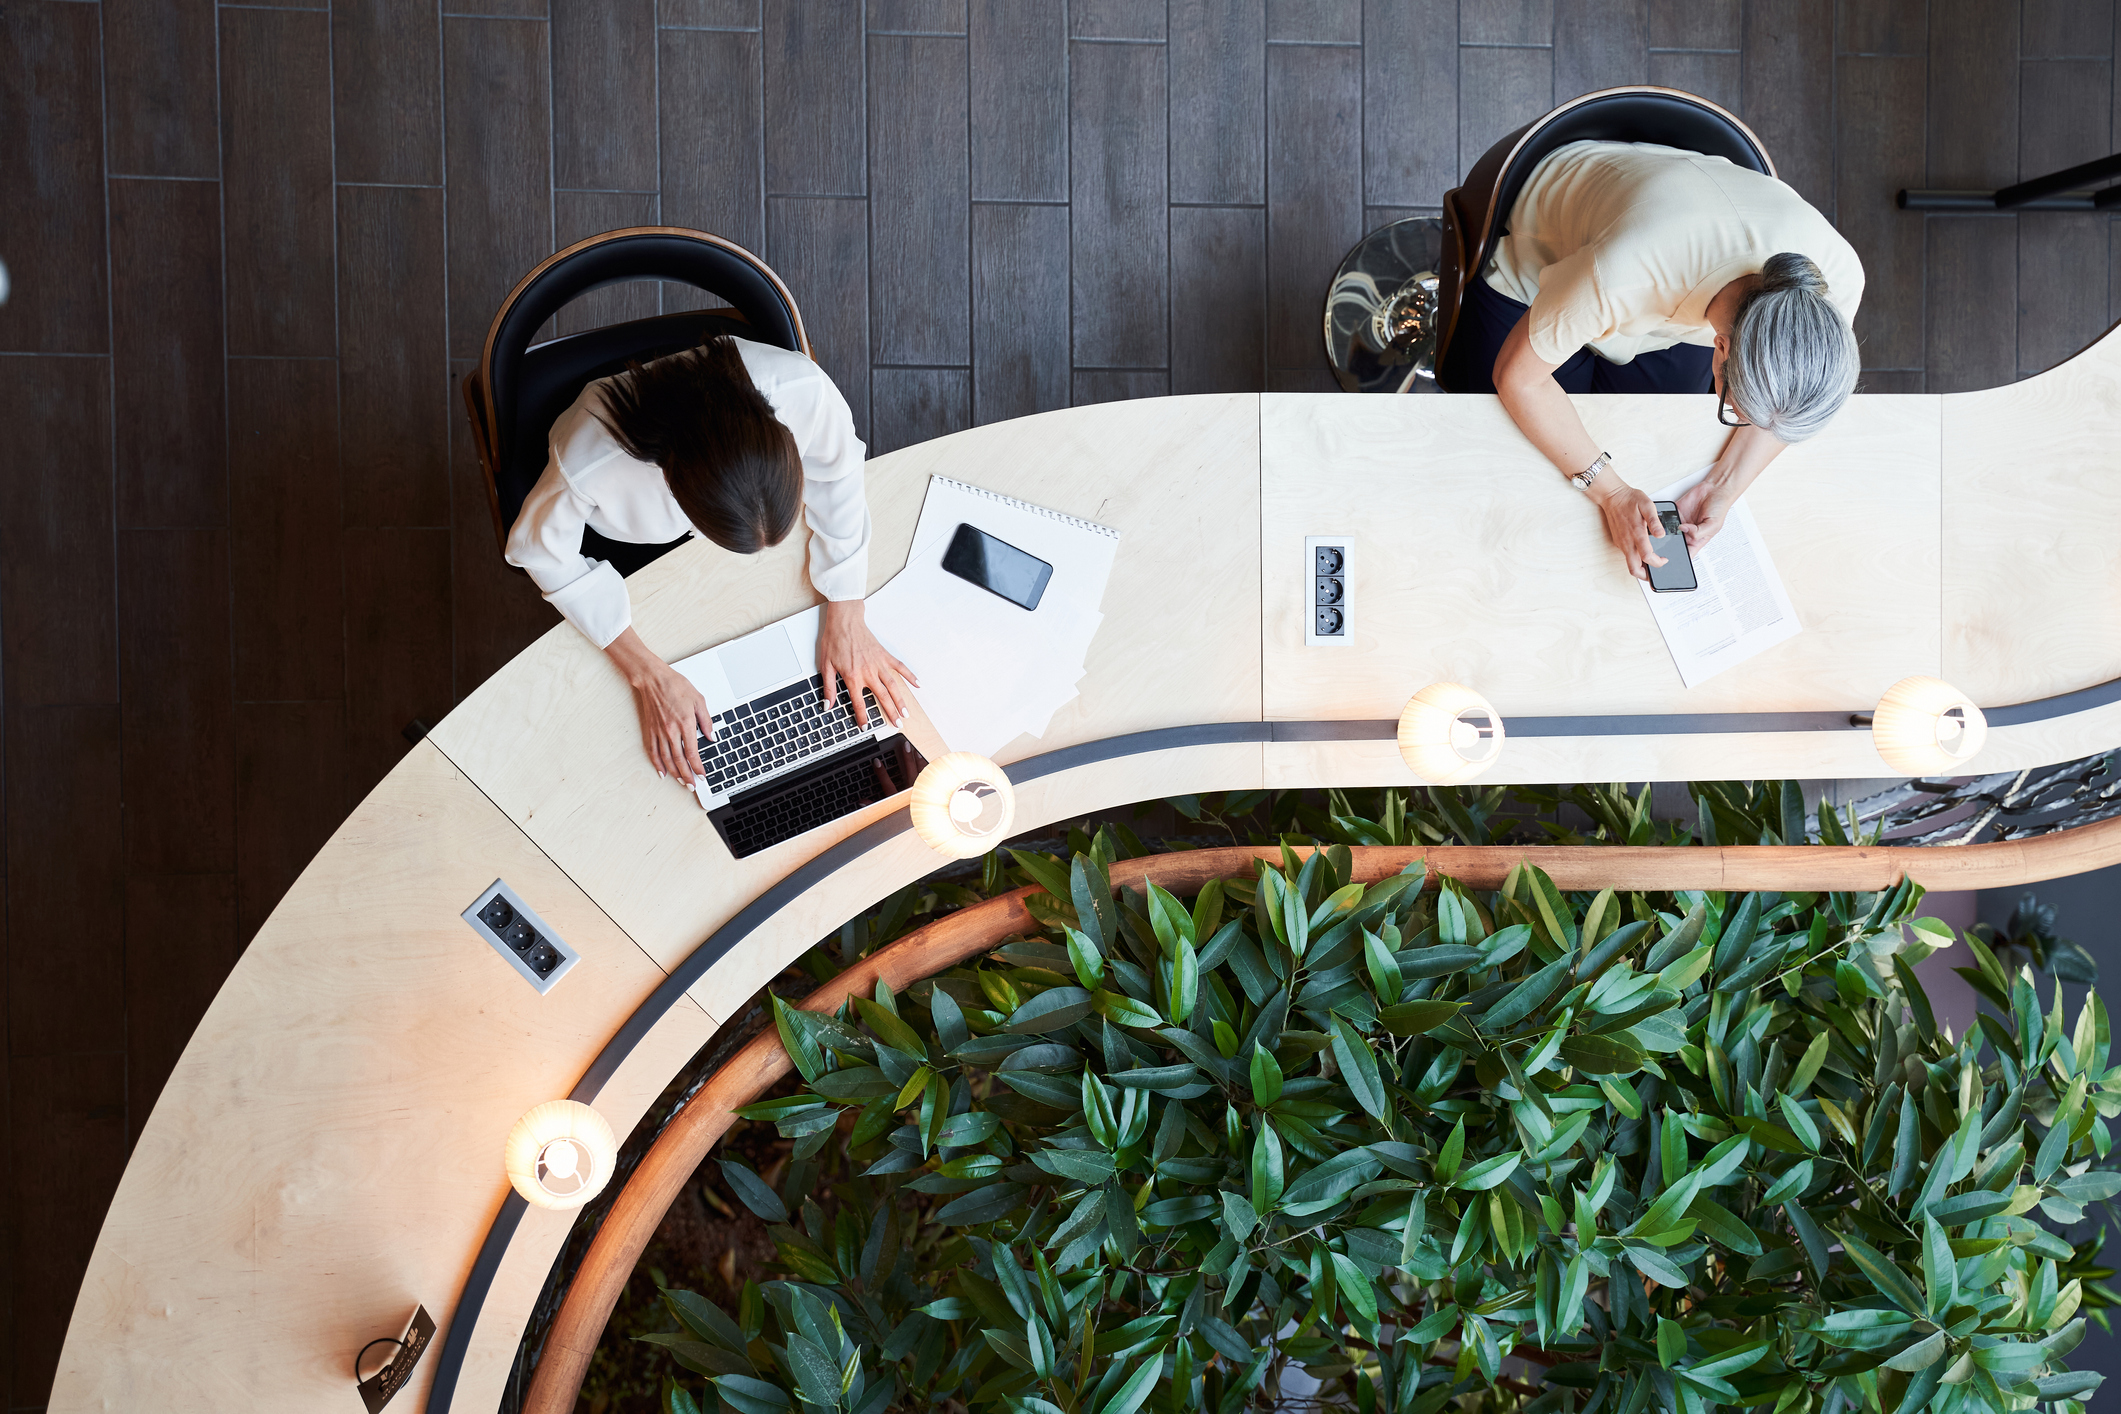 Top view of employees working on electronic devices at a curved table with indoor foliage.